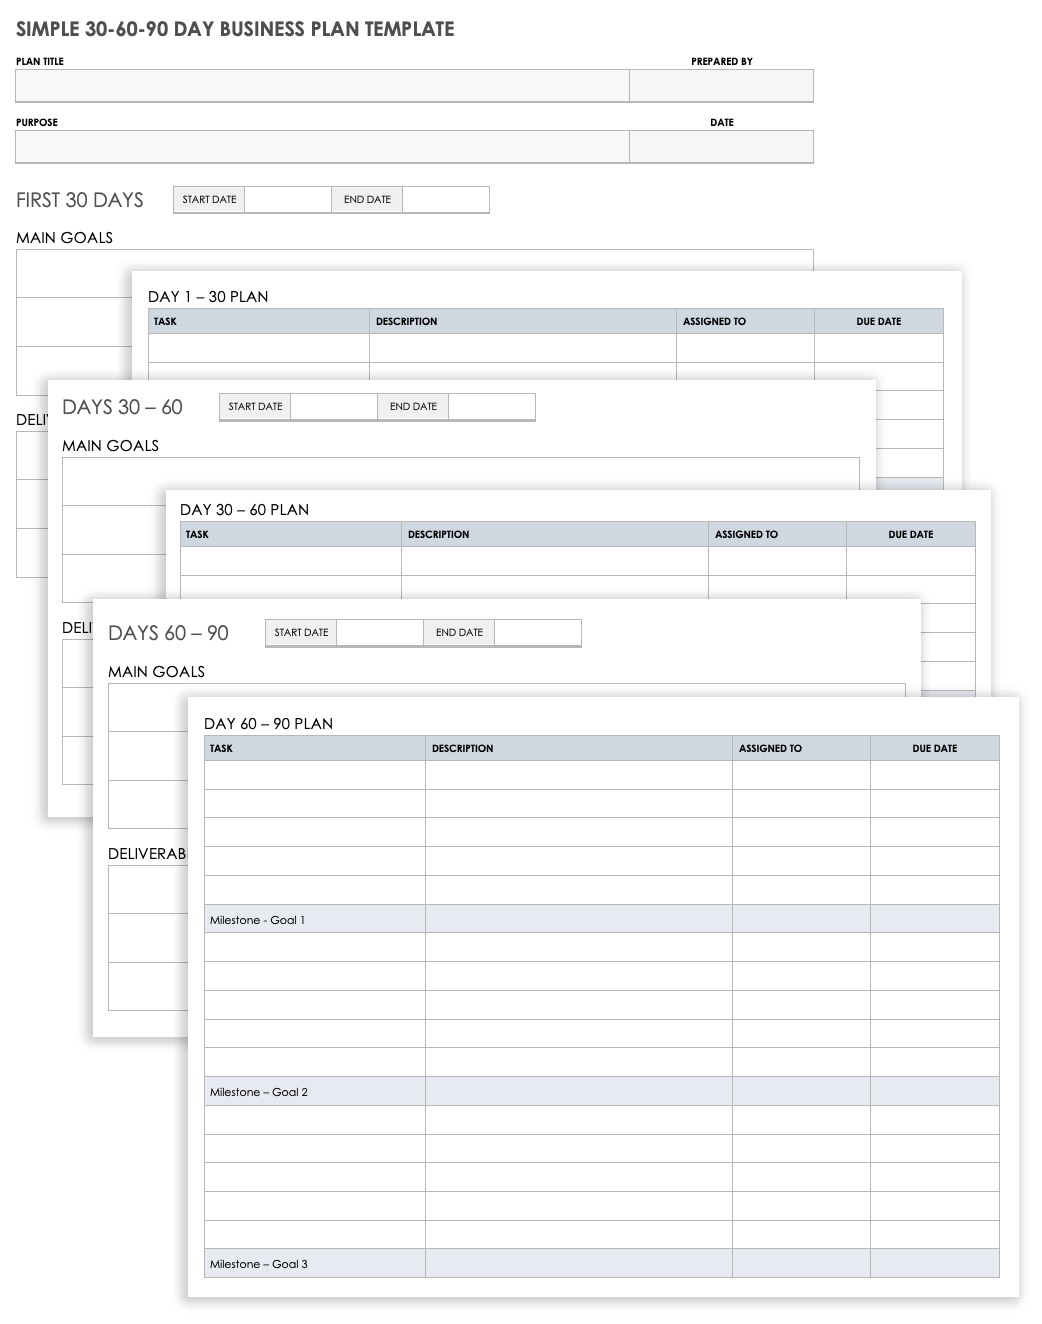 Free 30 60 90 Day Plan Template Excel